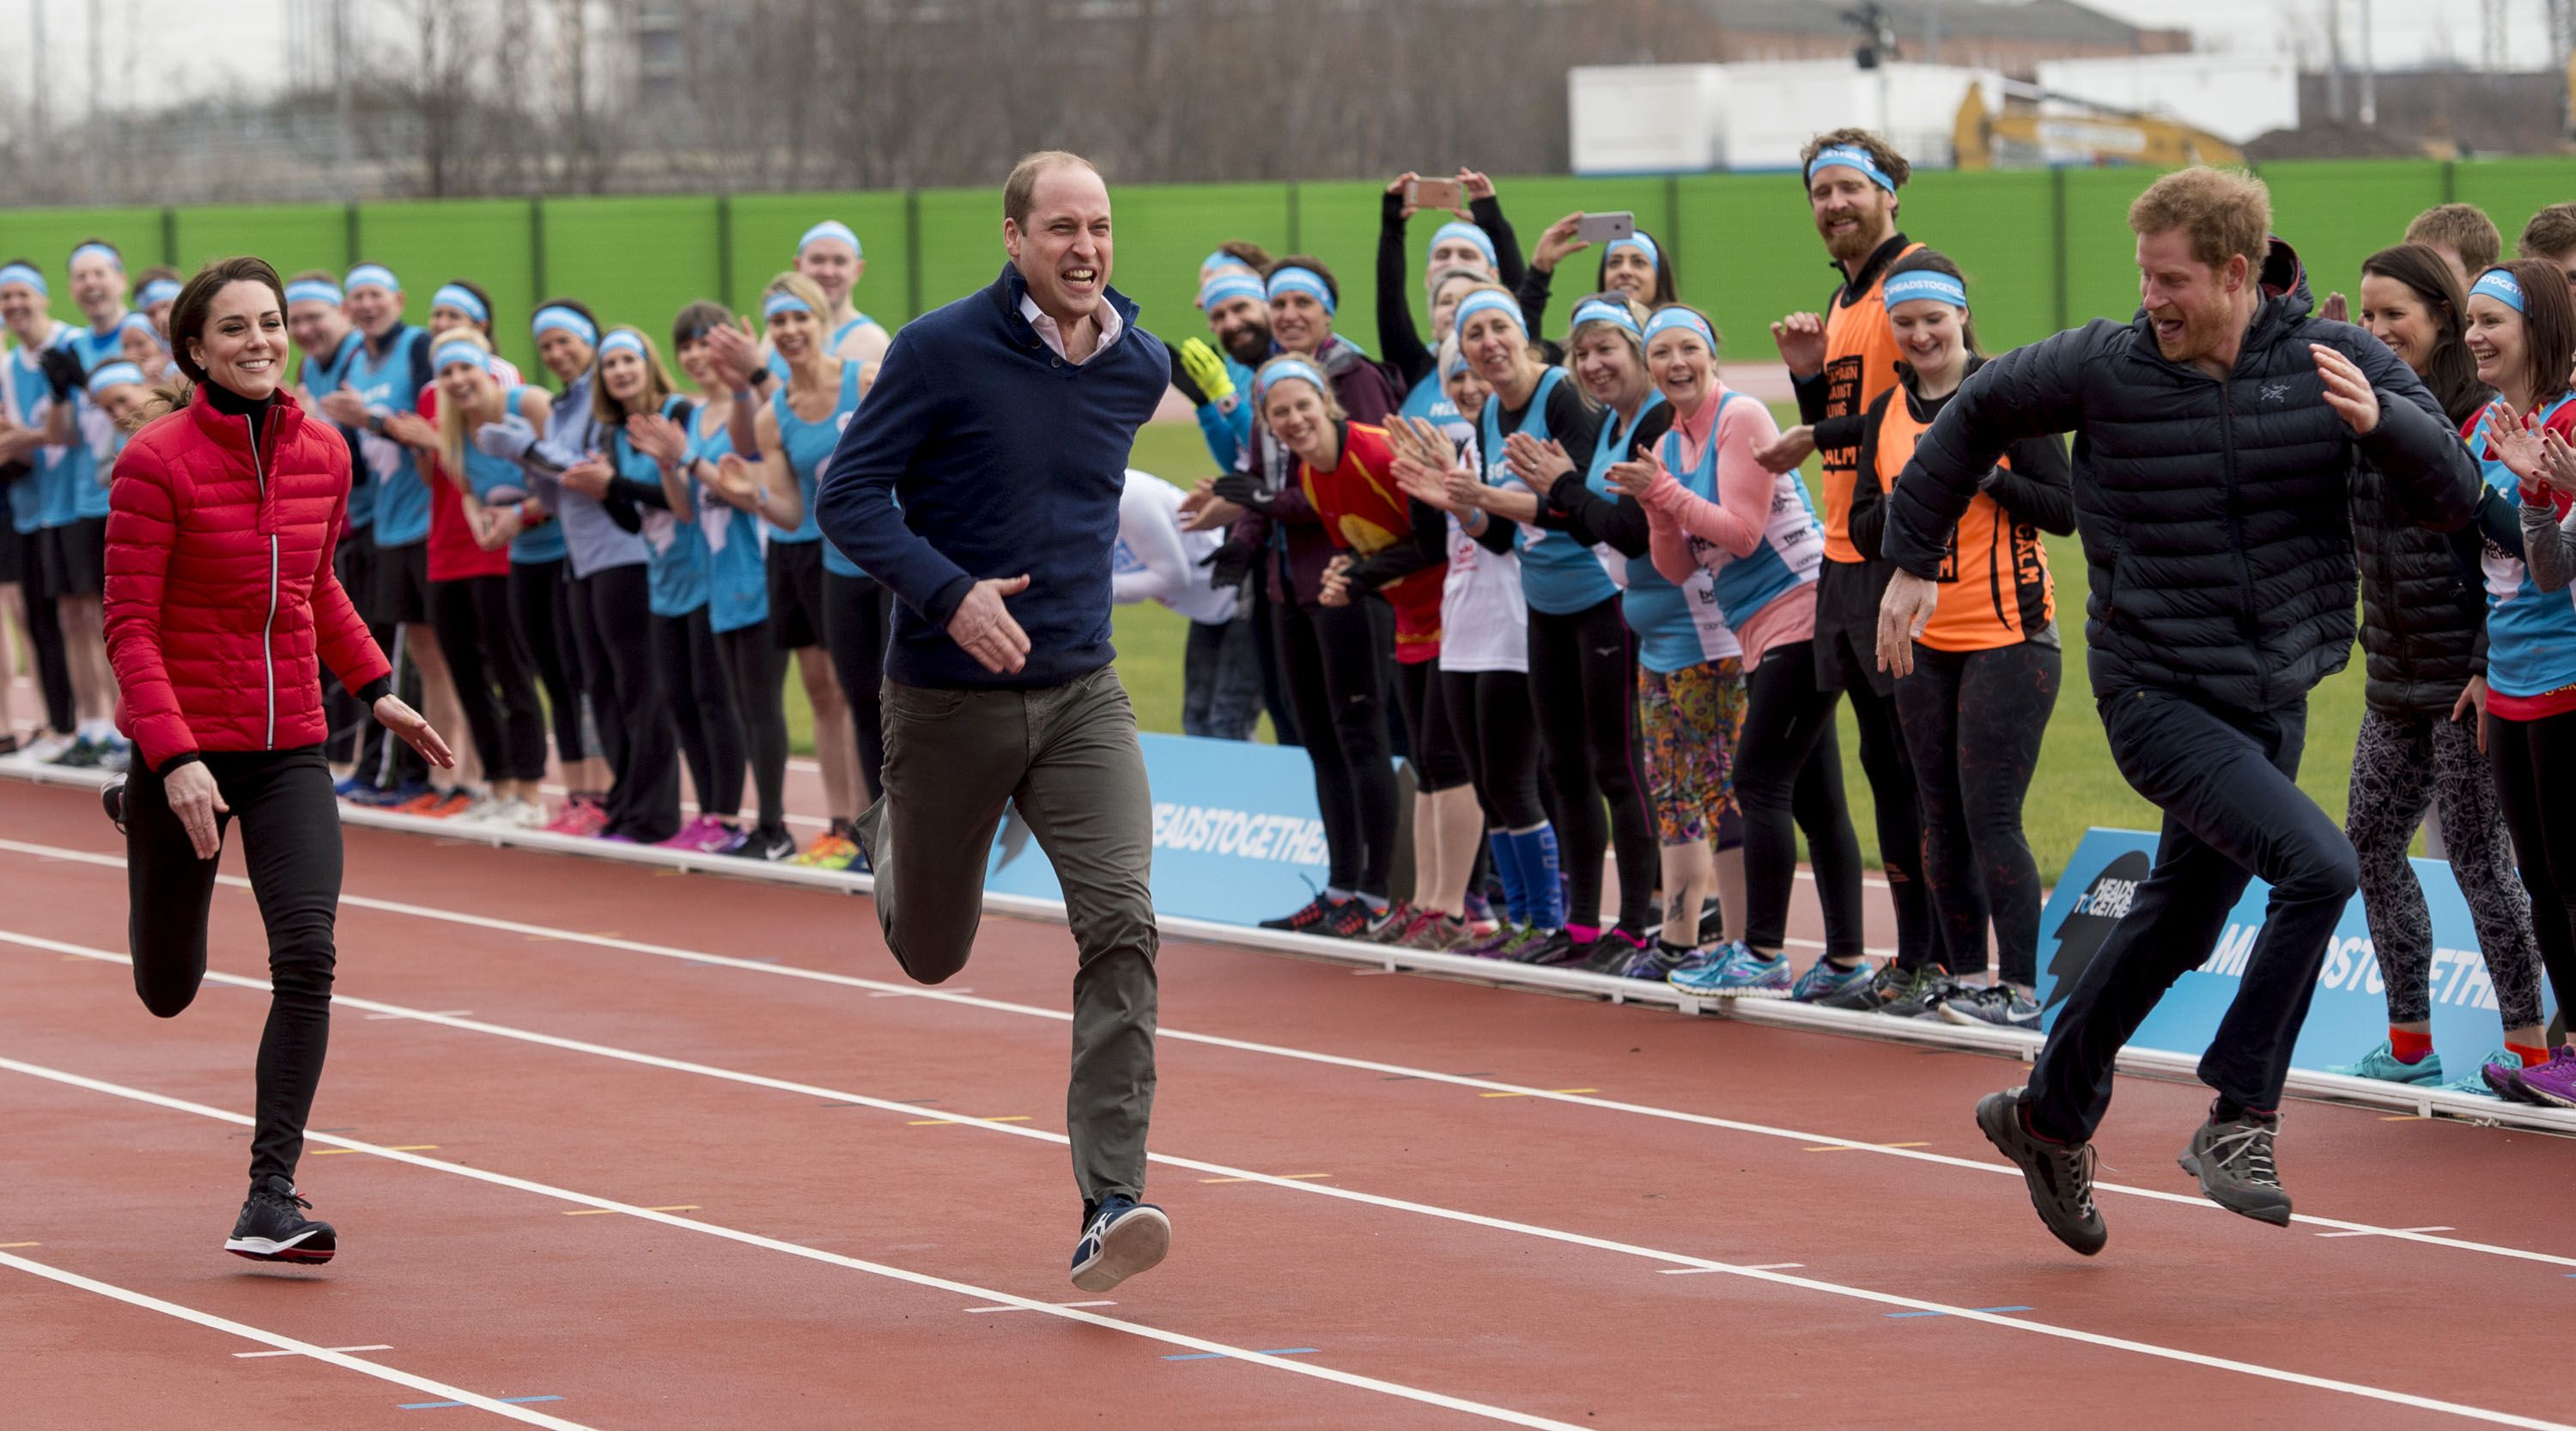 Watch Prince William, Prince Harry, and Kate Middleton Race - Video of Prince Prince Harry, and Kate Middleton at their Heads Together Event